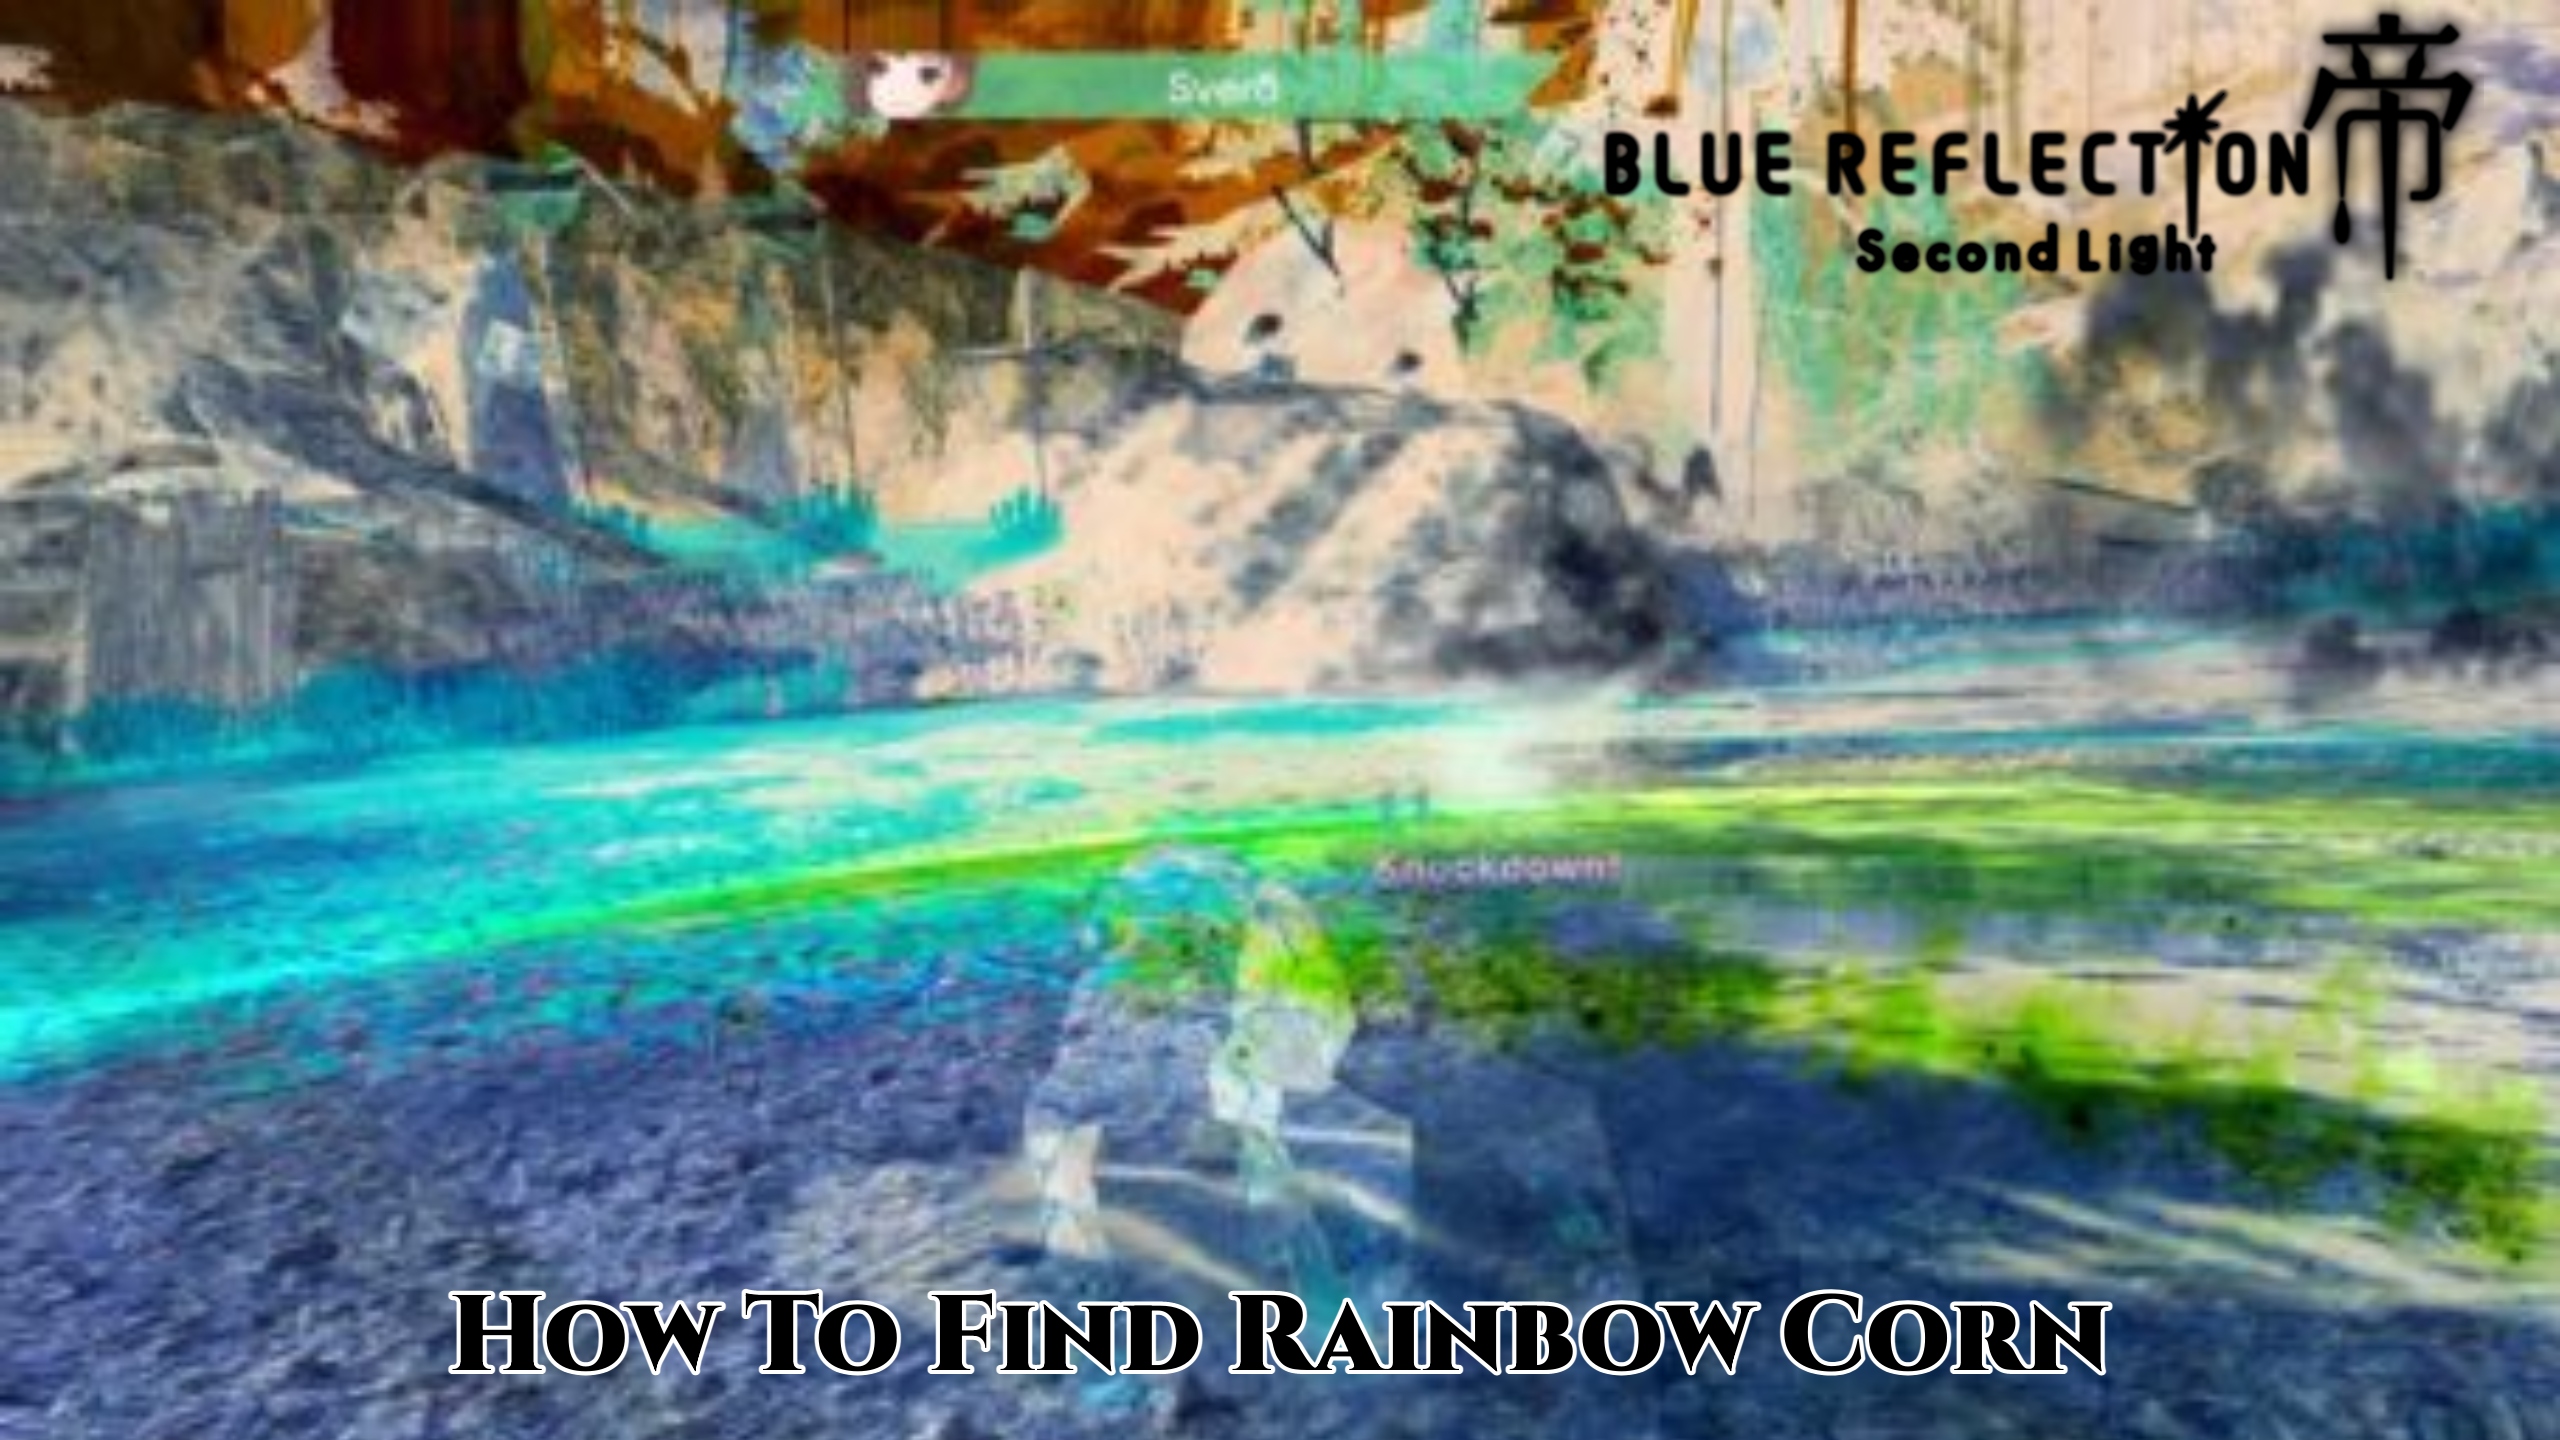 You are currently viewing How To Find Rainbow Corn in Blue Reflection: Second Light